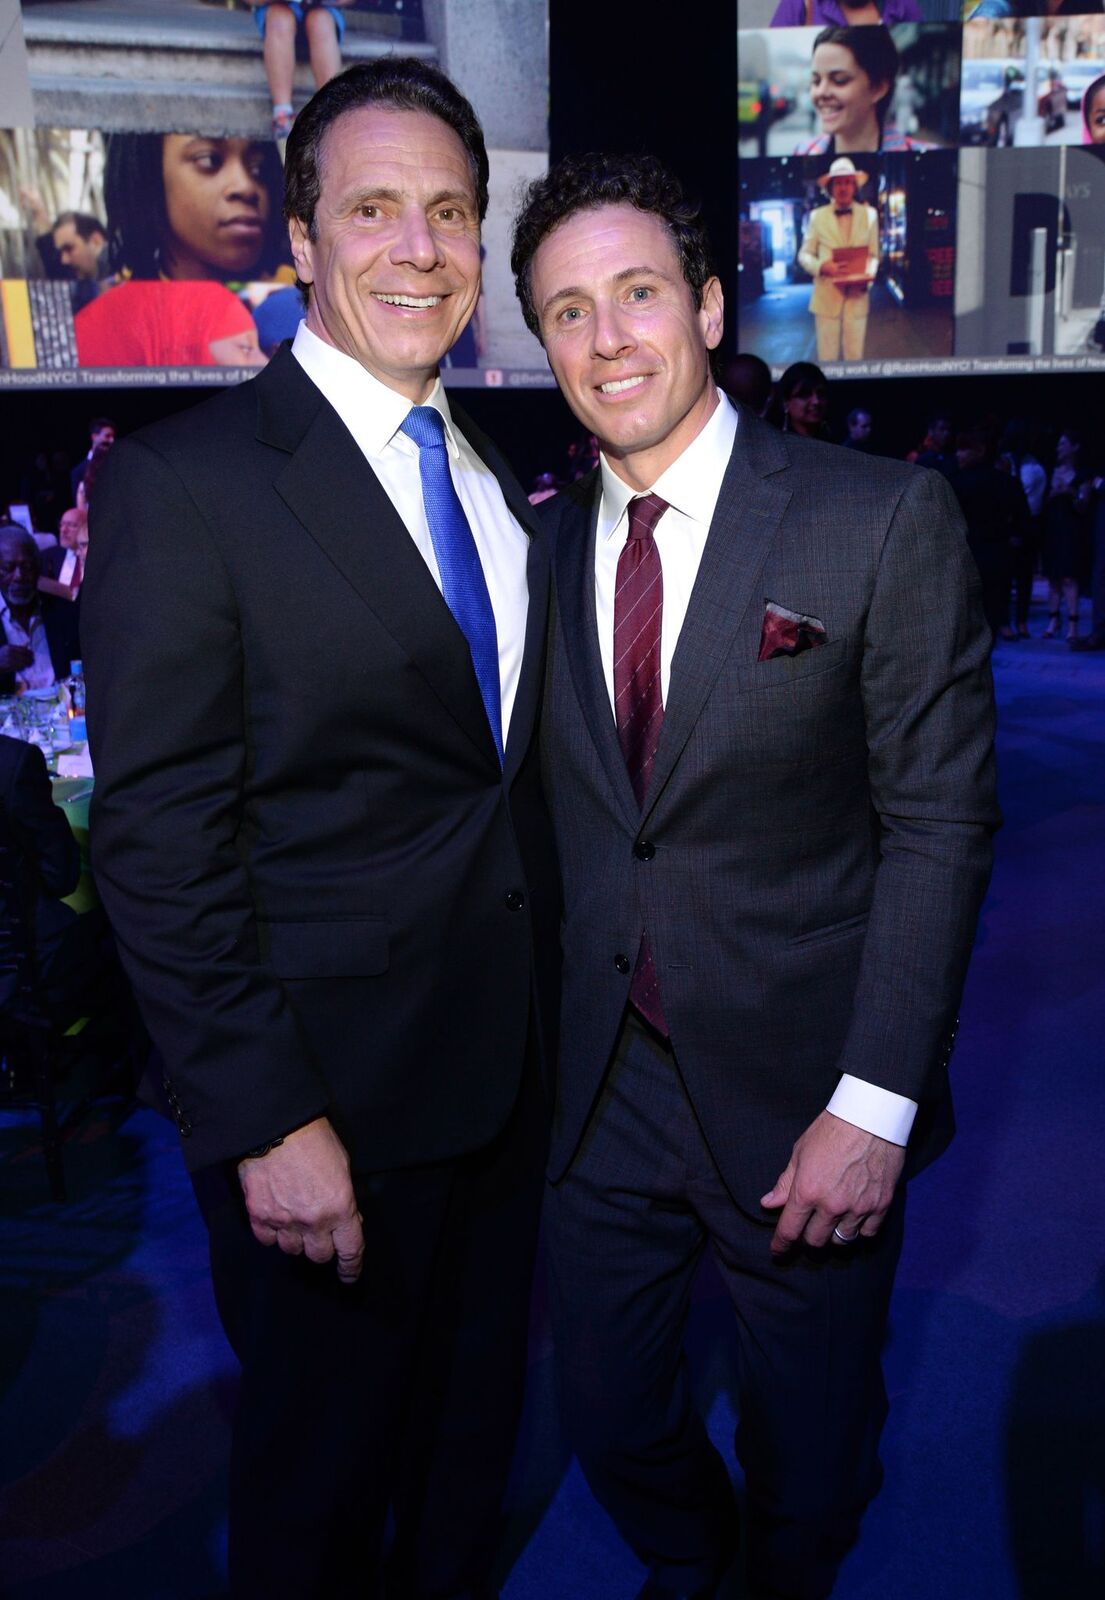 New York Governor Andrew and Chris Cuomo at The Robin Hood Foundation's Benefit on May 12, 2015, in New York City | Photo: Kevin Mazur/Getty Images